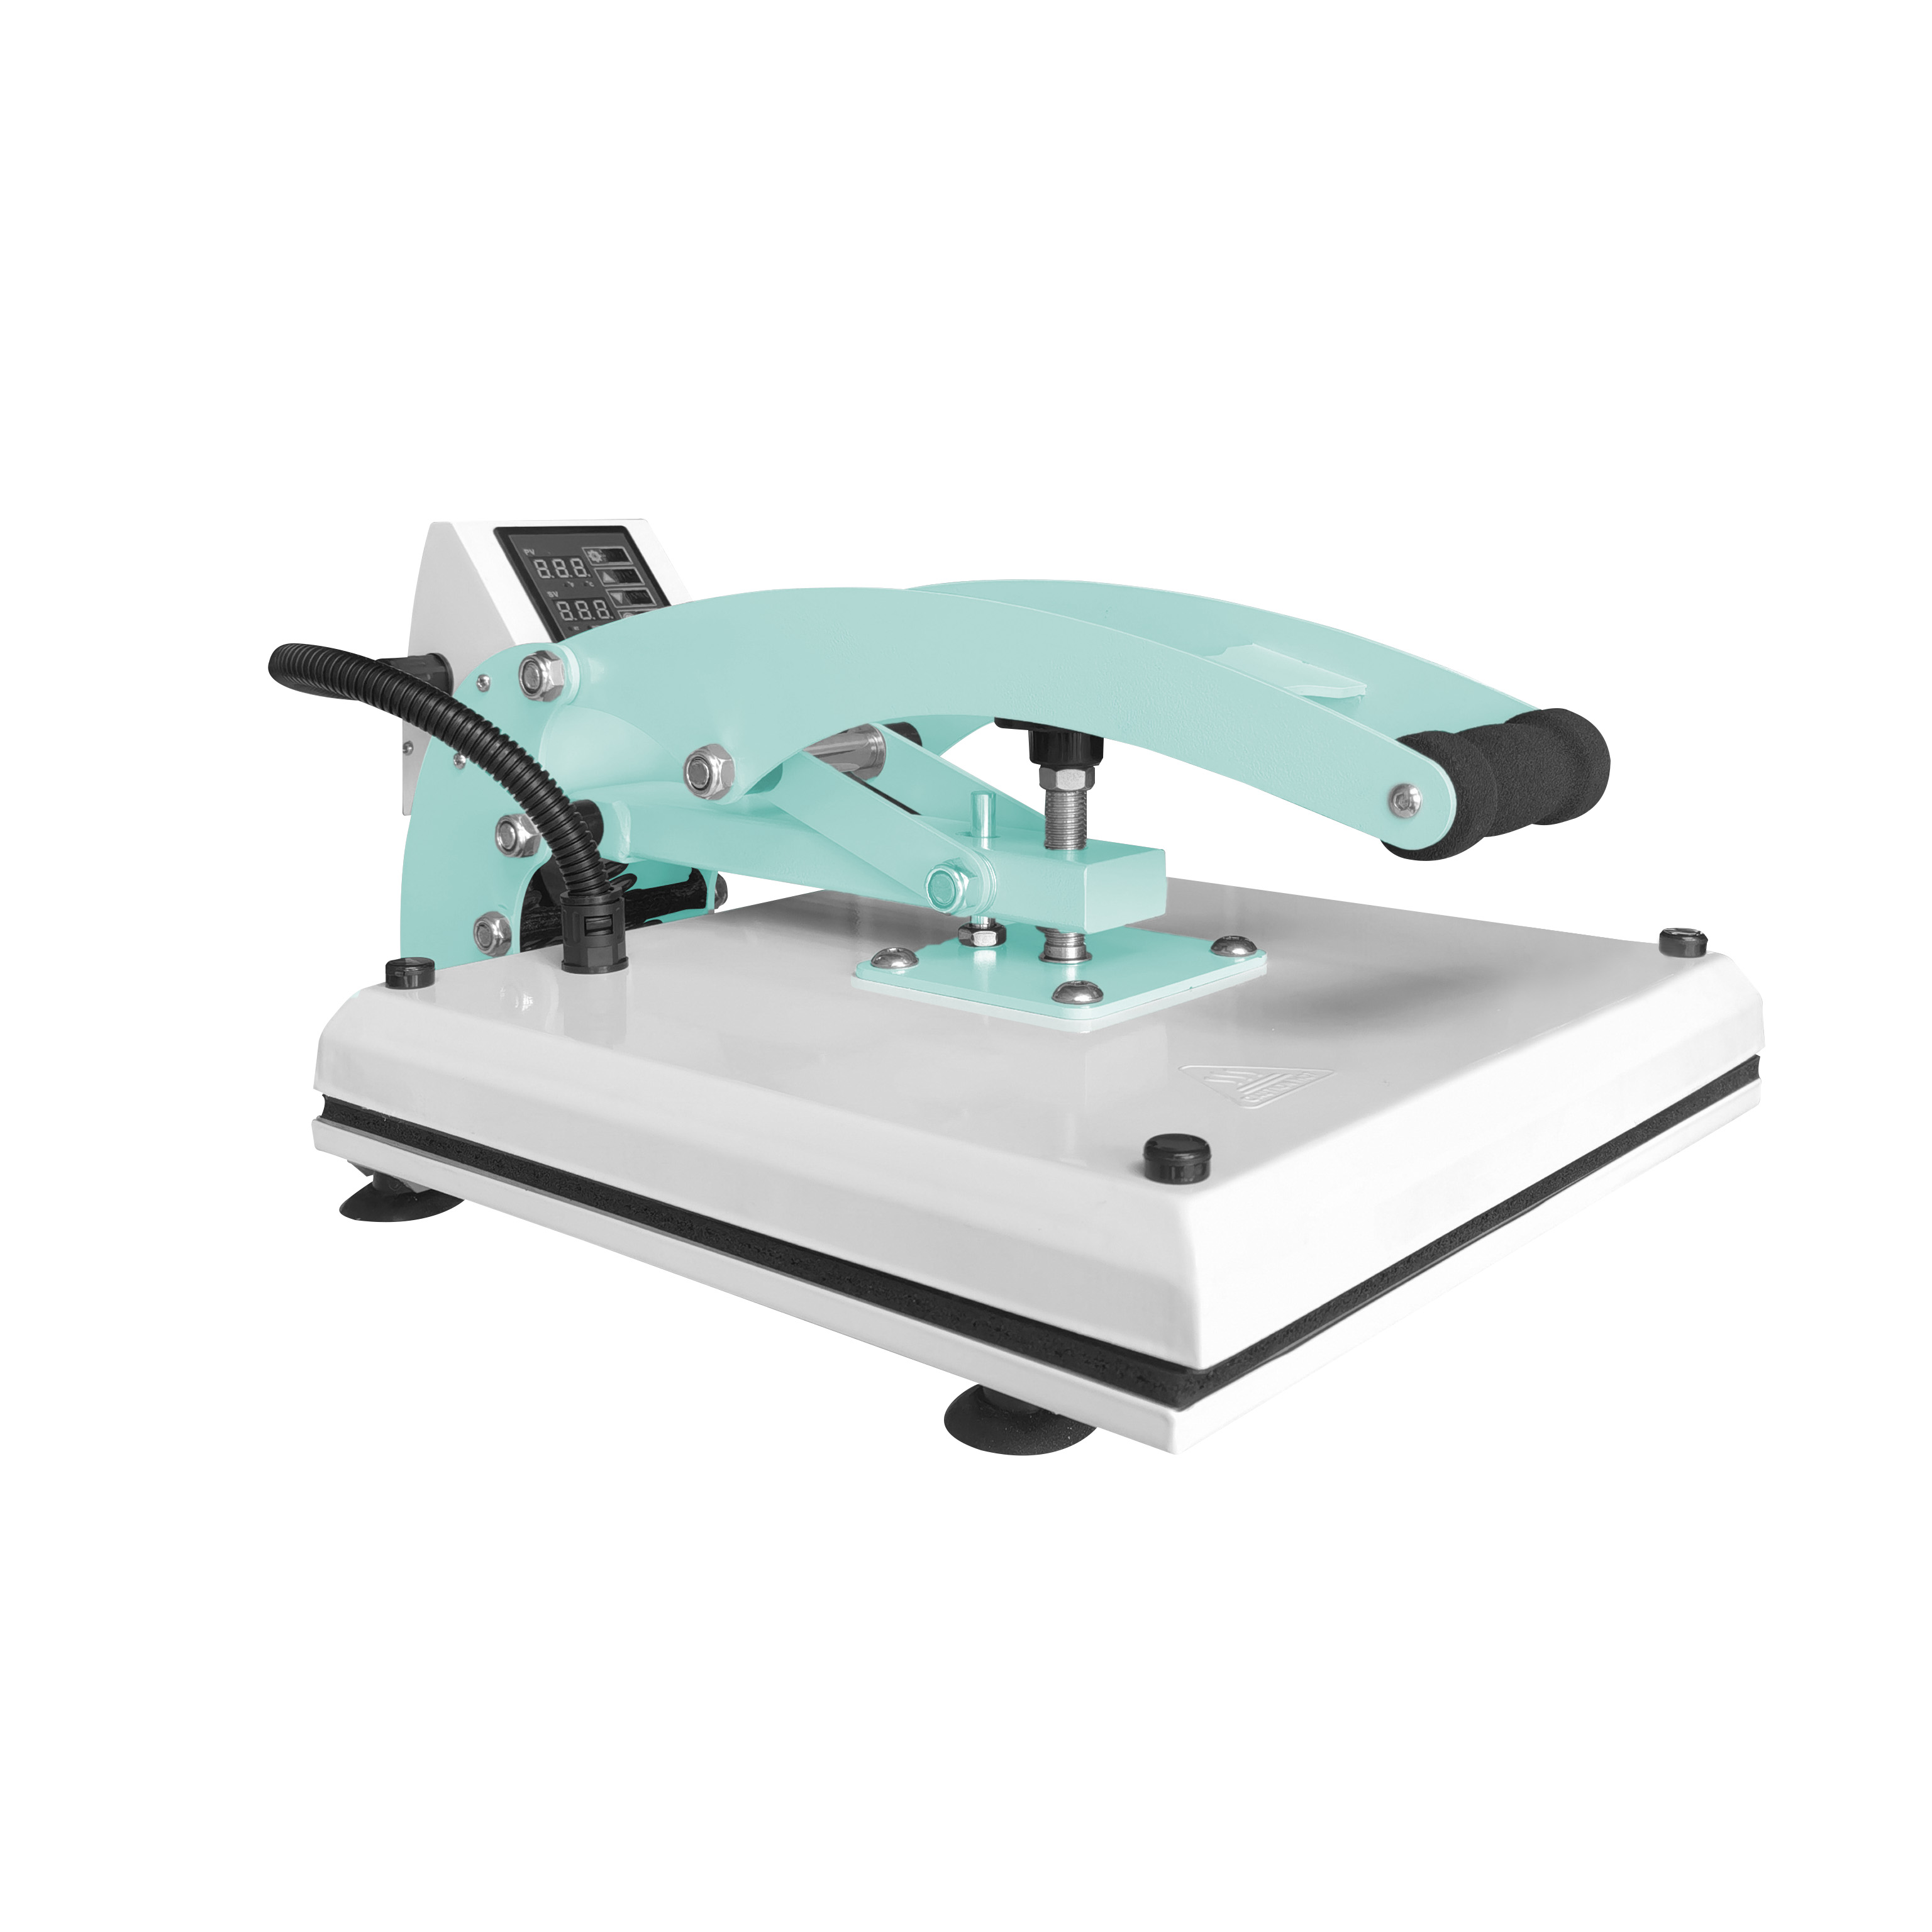 Wholesale 15″ x 15″ Craft Heat Press Transfer Printing Machine – Mint  Manufacturer and Supplier